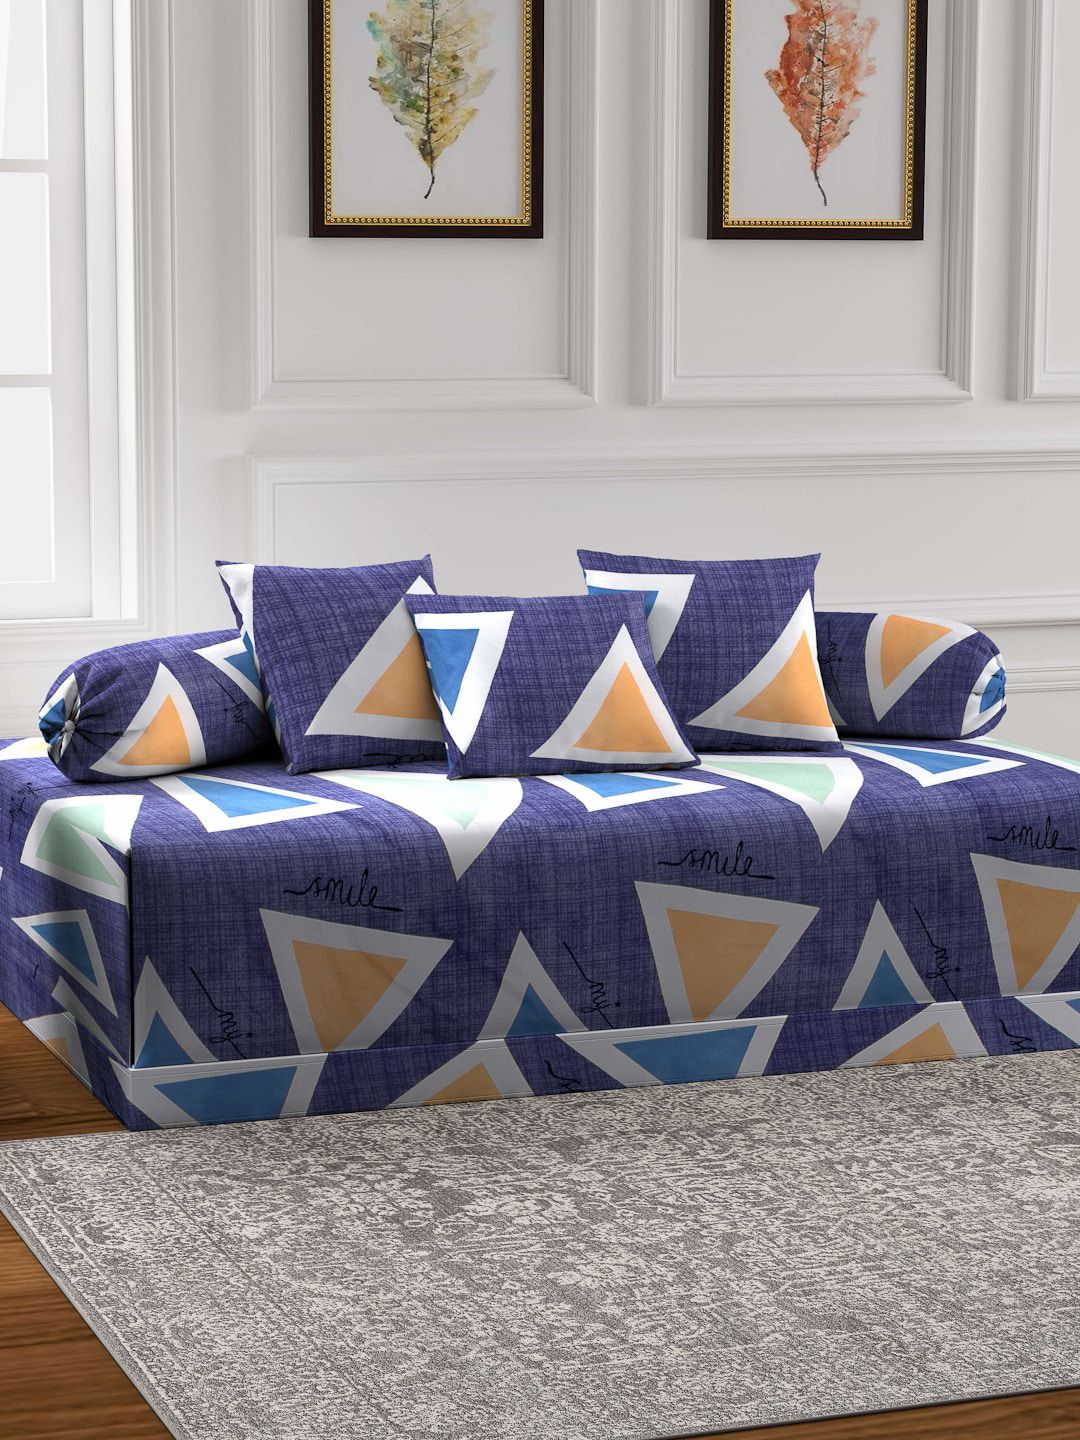 Arrabi Multi Set of 6 Blue & White Geometric Print Diwan Set with Bolster & Cushion Covers Price in India